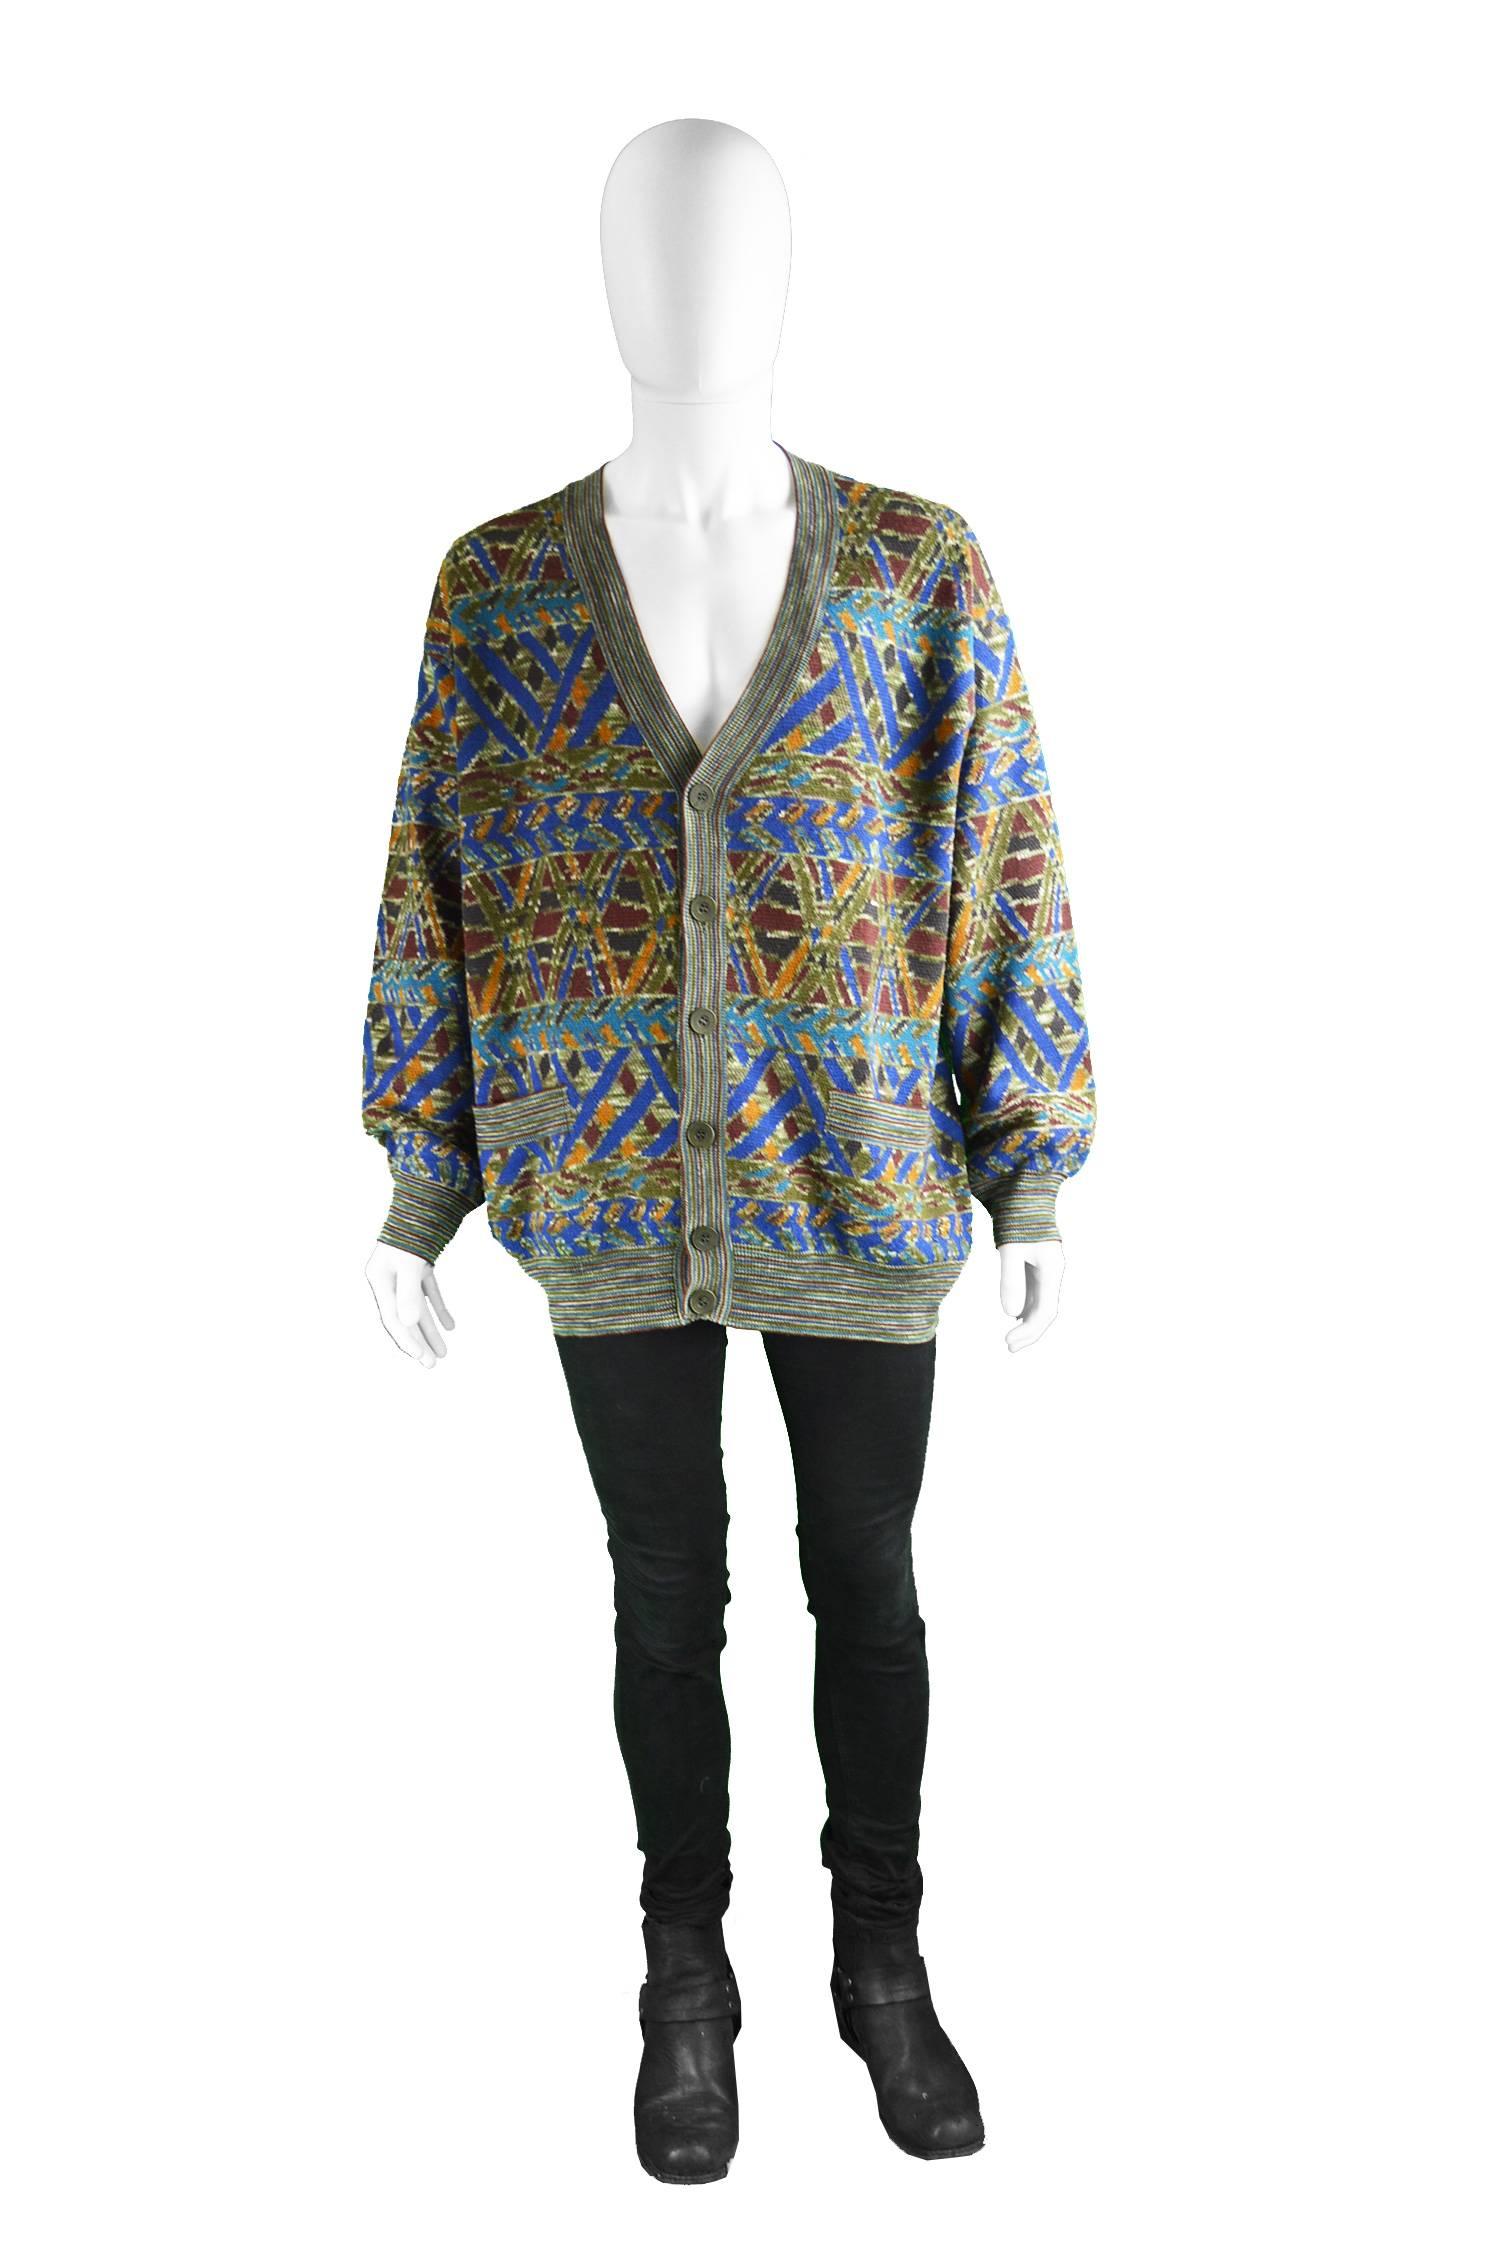 Missoni Men's Vintage Multicoloured Patterned Wool Cardigan Sweater, 1990s

Size: Marked 56 which is roughly a men's 2XL but looks great with a slouchy oversized fit on a men's Large to XL. Please check measurements.
Chest - Up to 54” / 137cm
Length